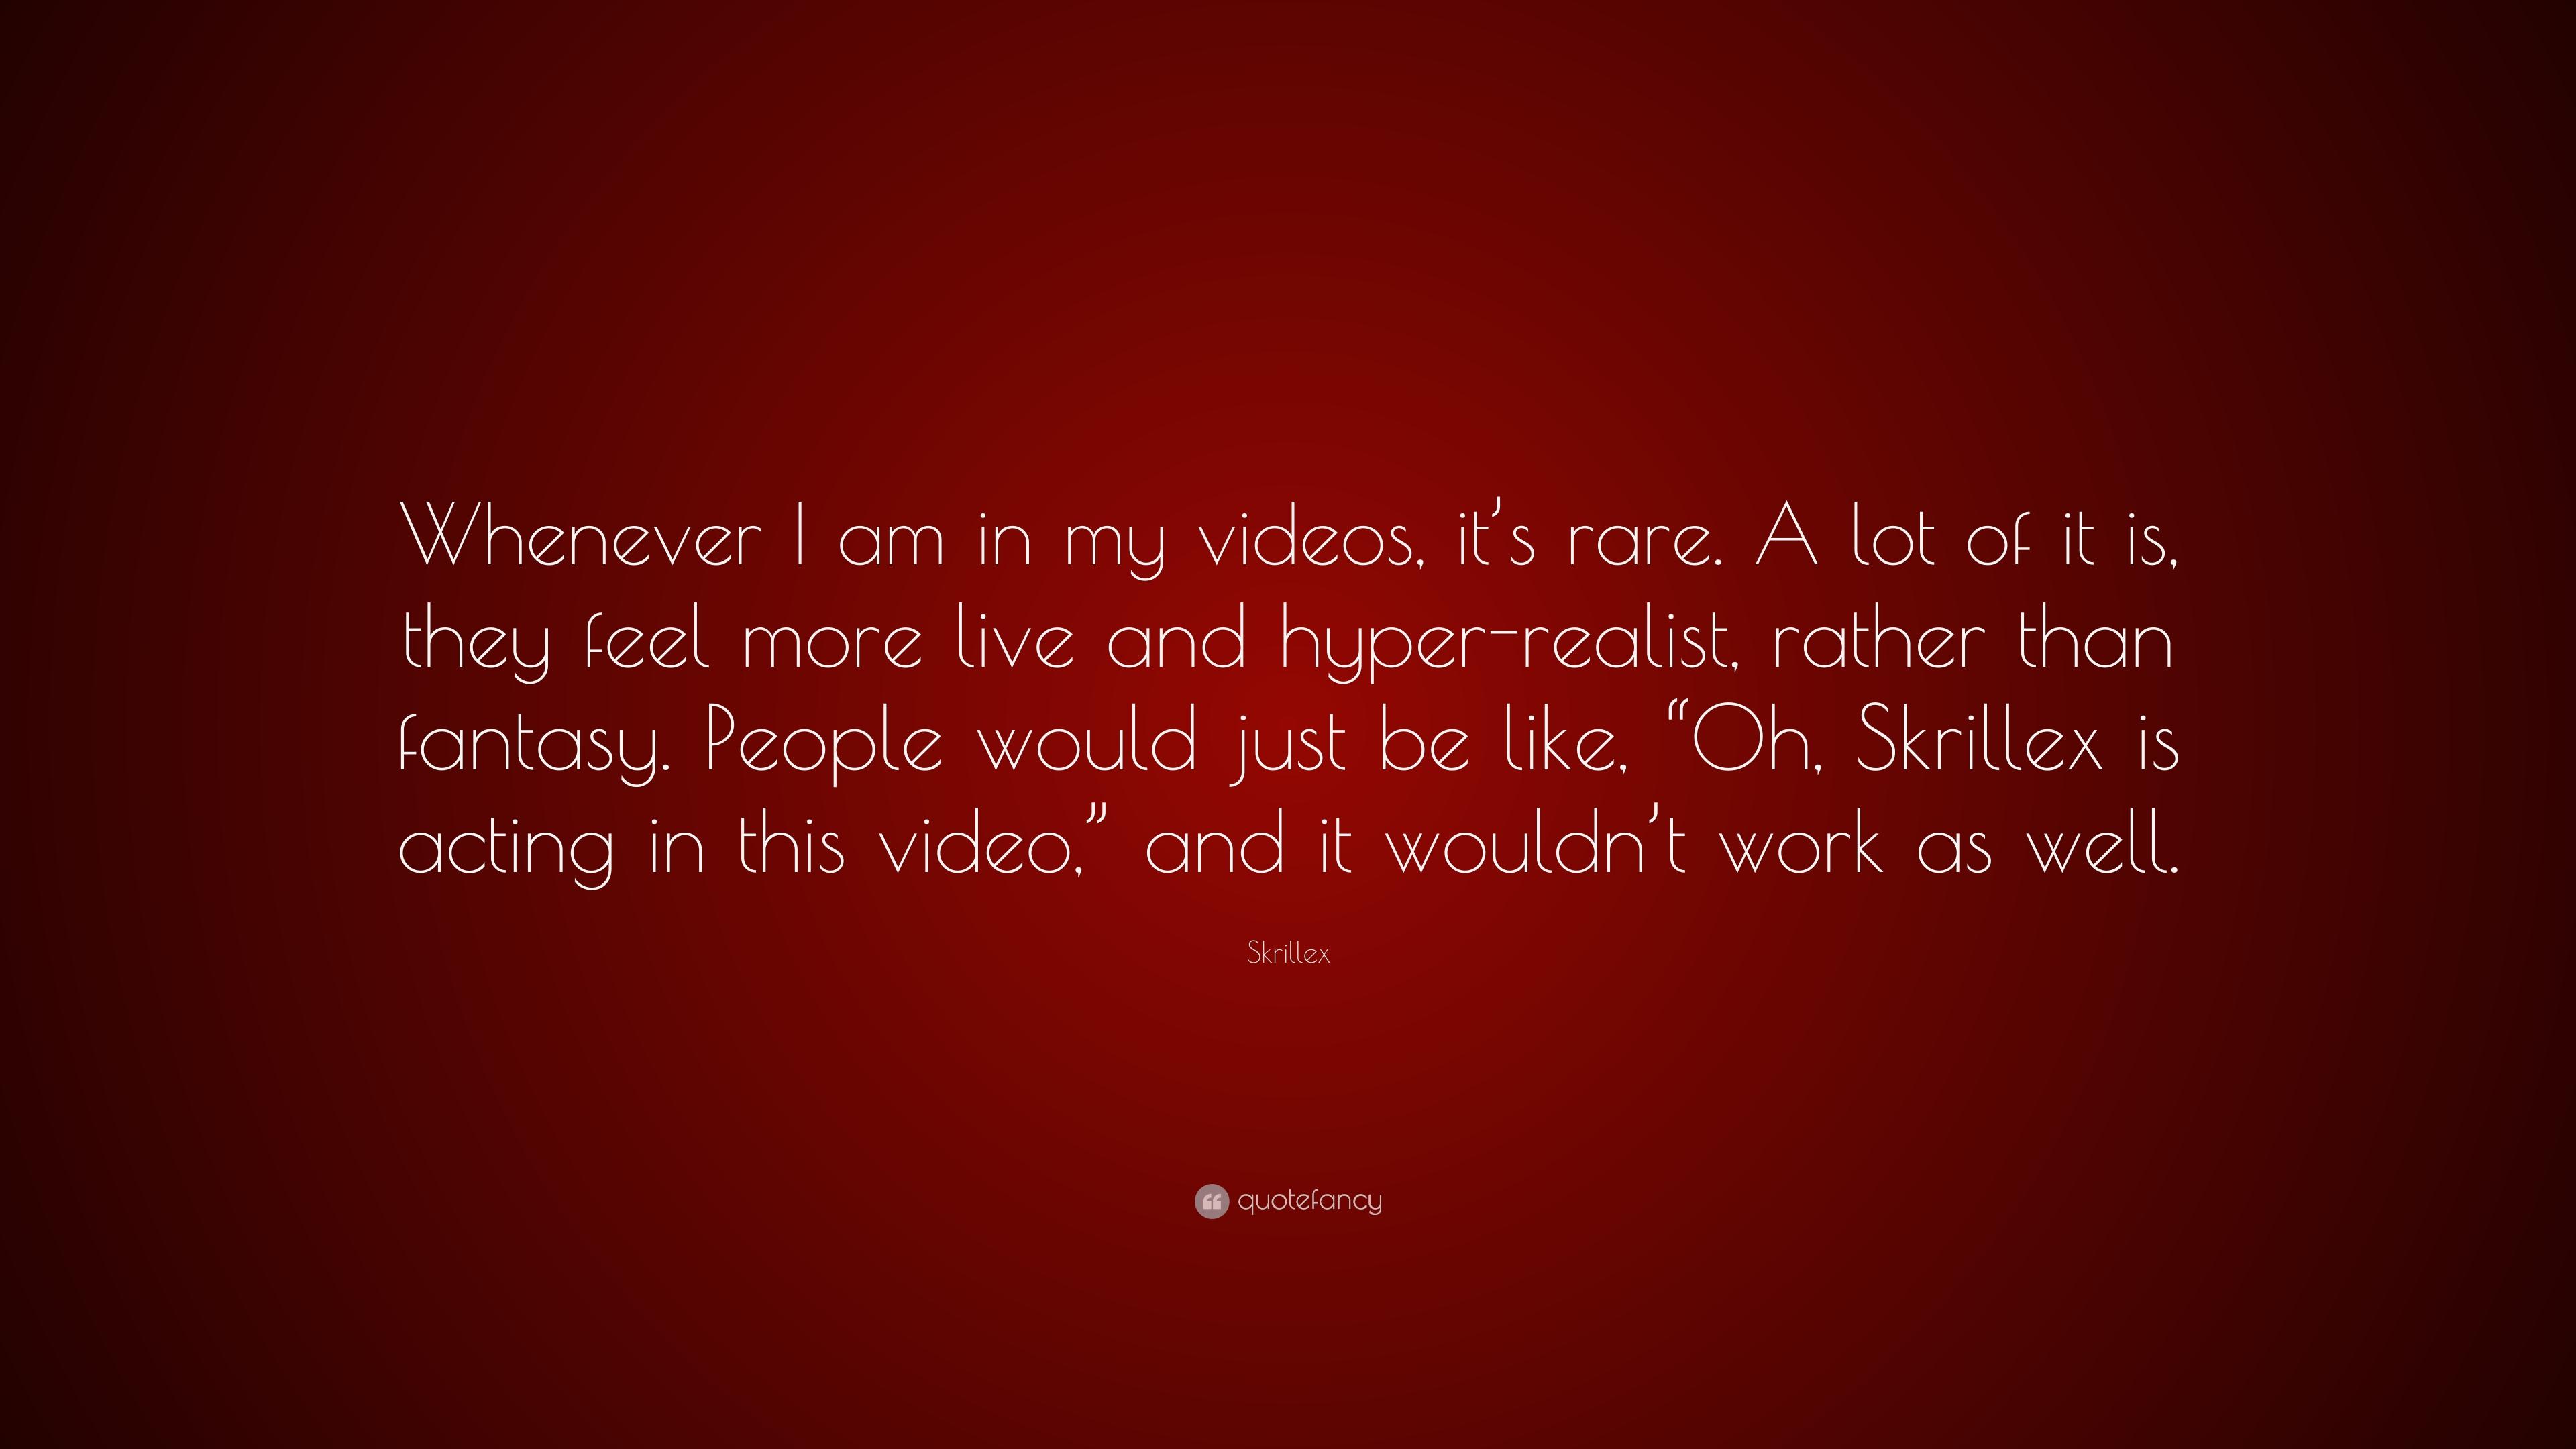 Skrillex Quote: “Whenever I am in my videos, it's rare. A lot of it